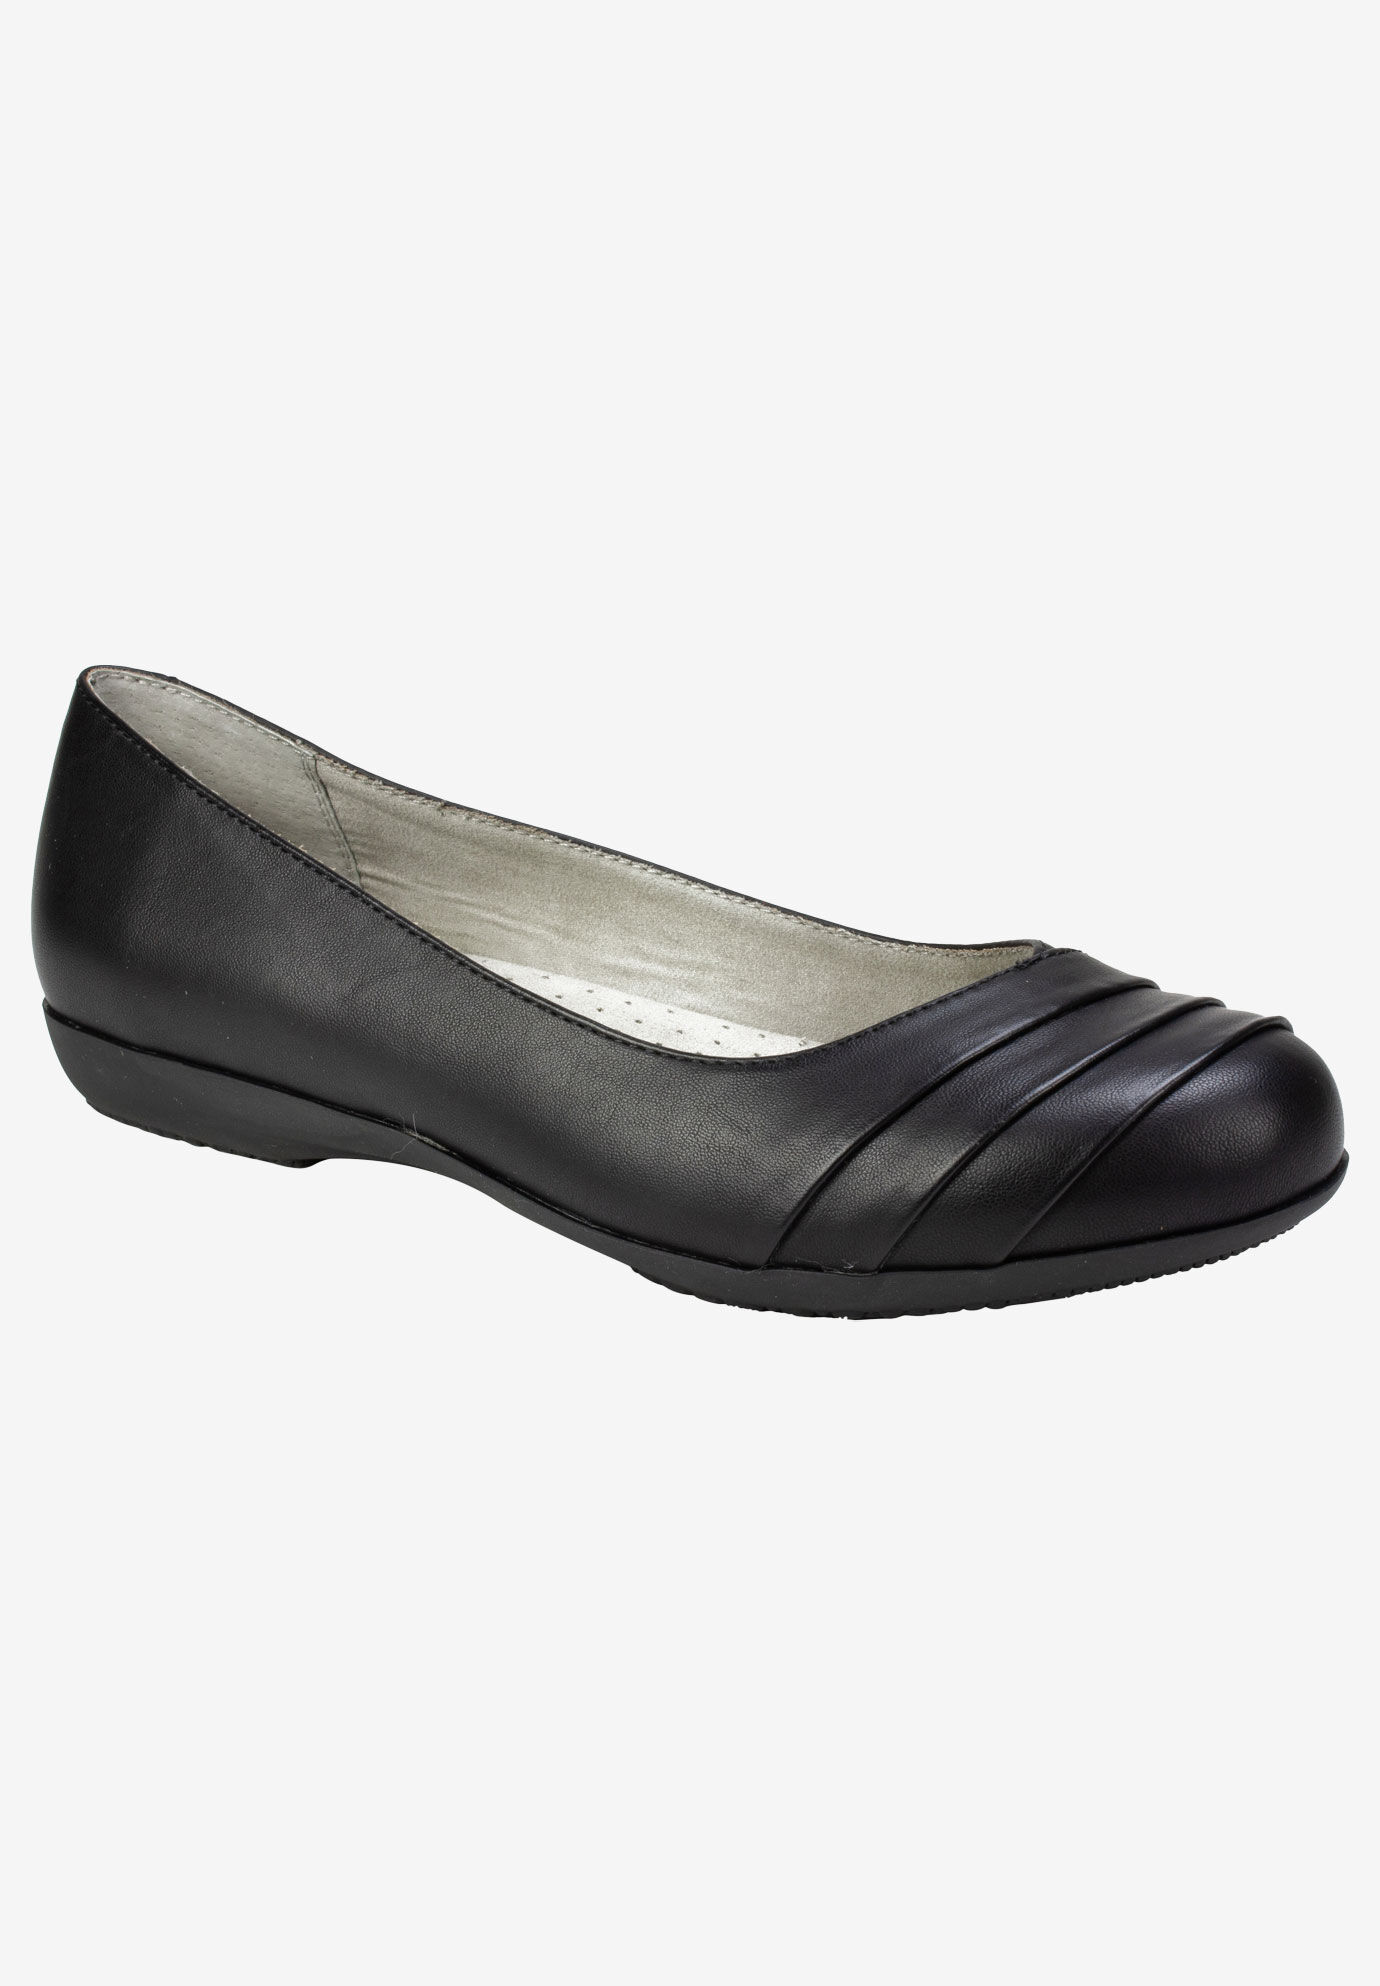 Wide Width Women's Clara Flat by Cliffs in Black Burnished Smooth (Size 10 W)